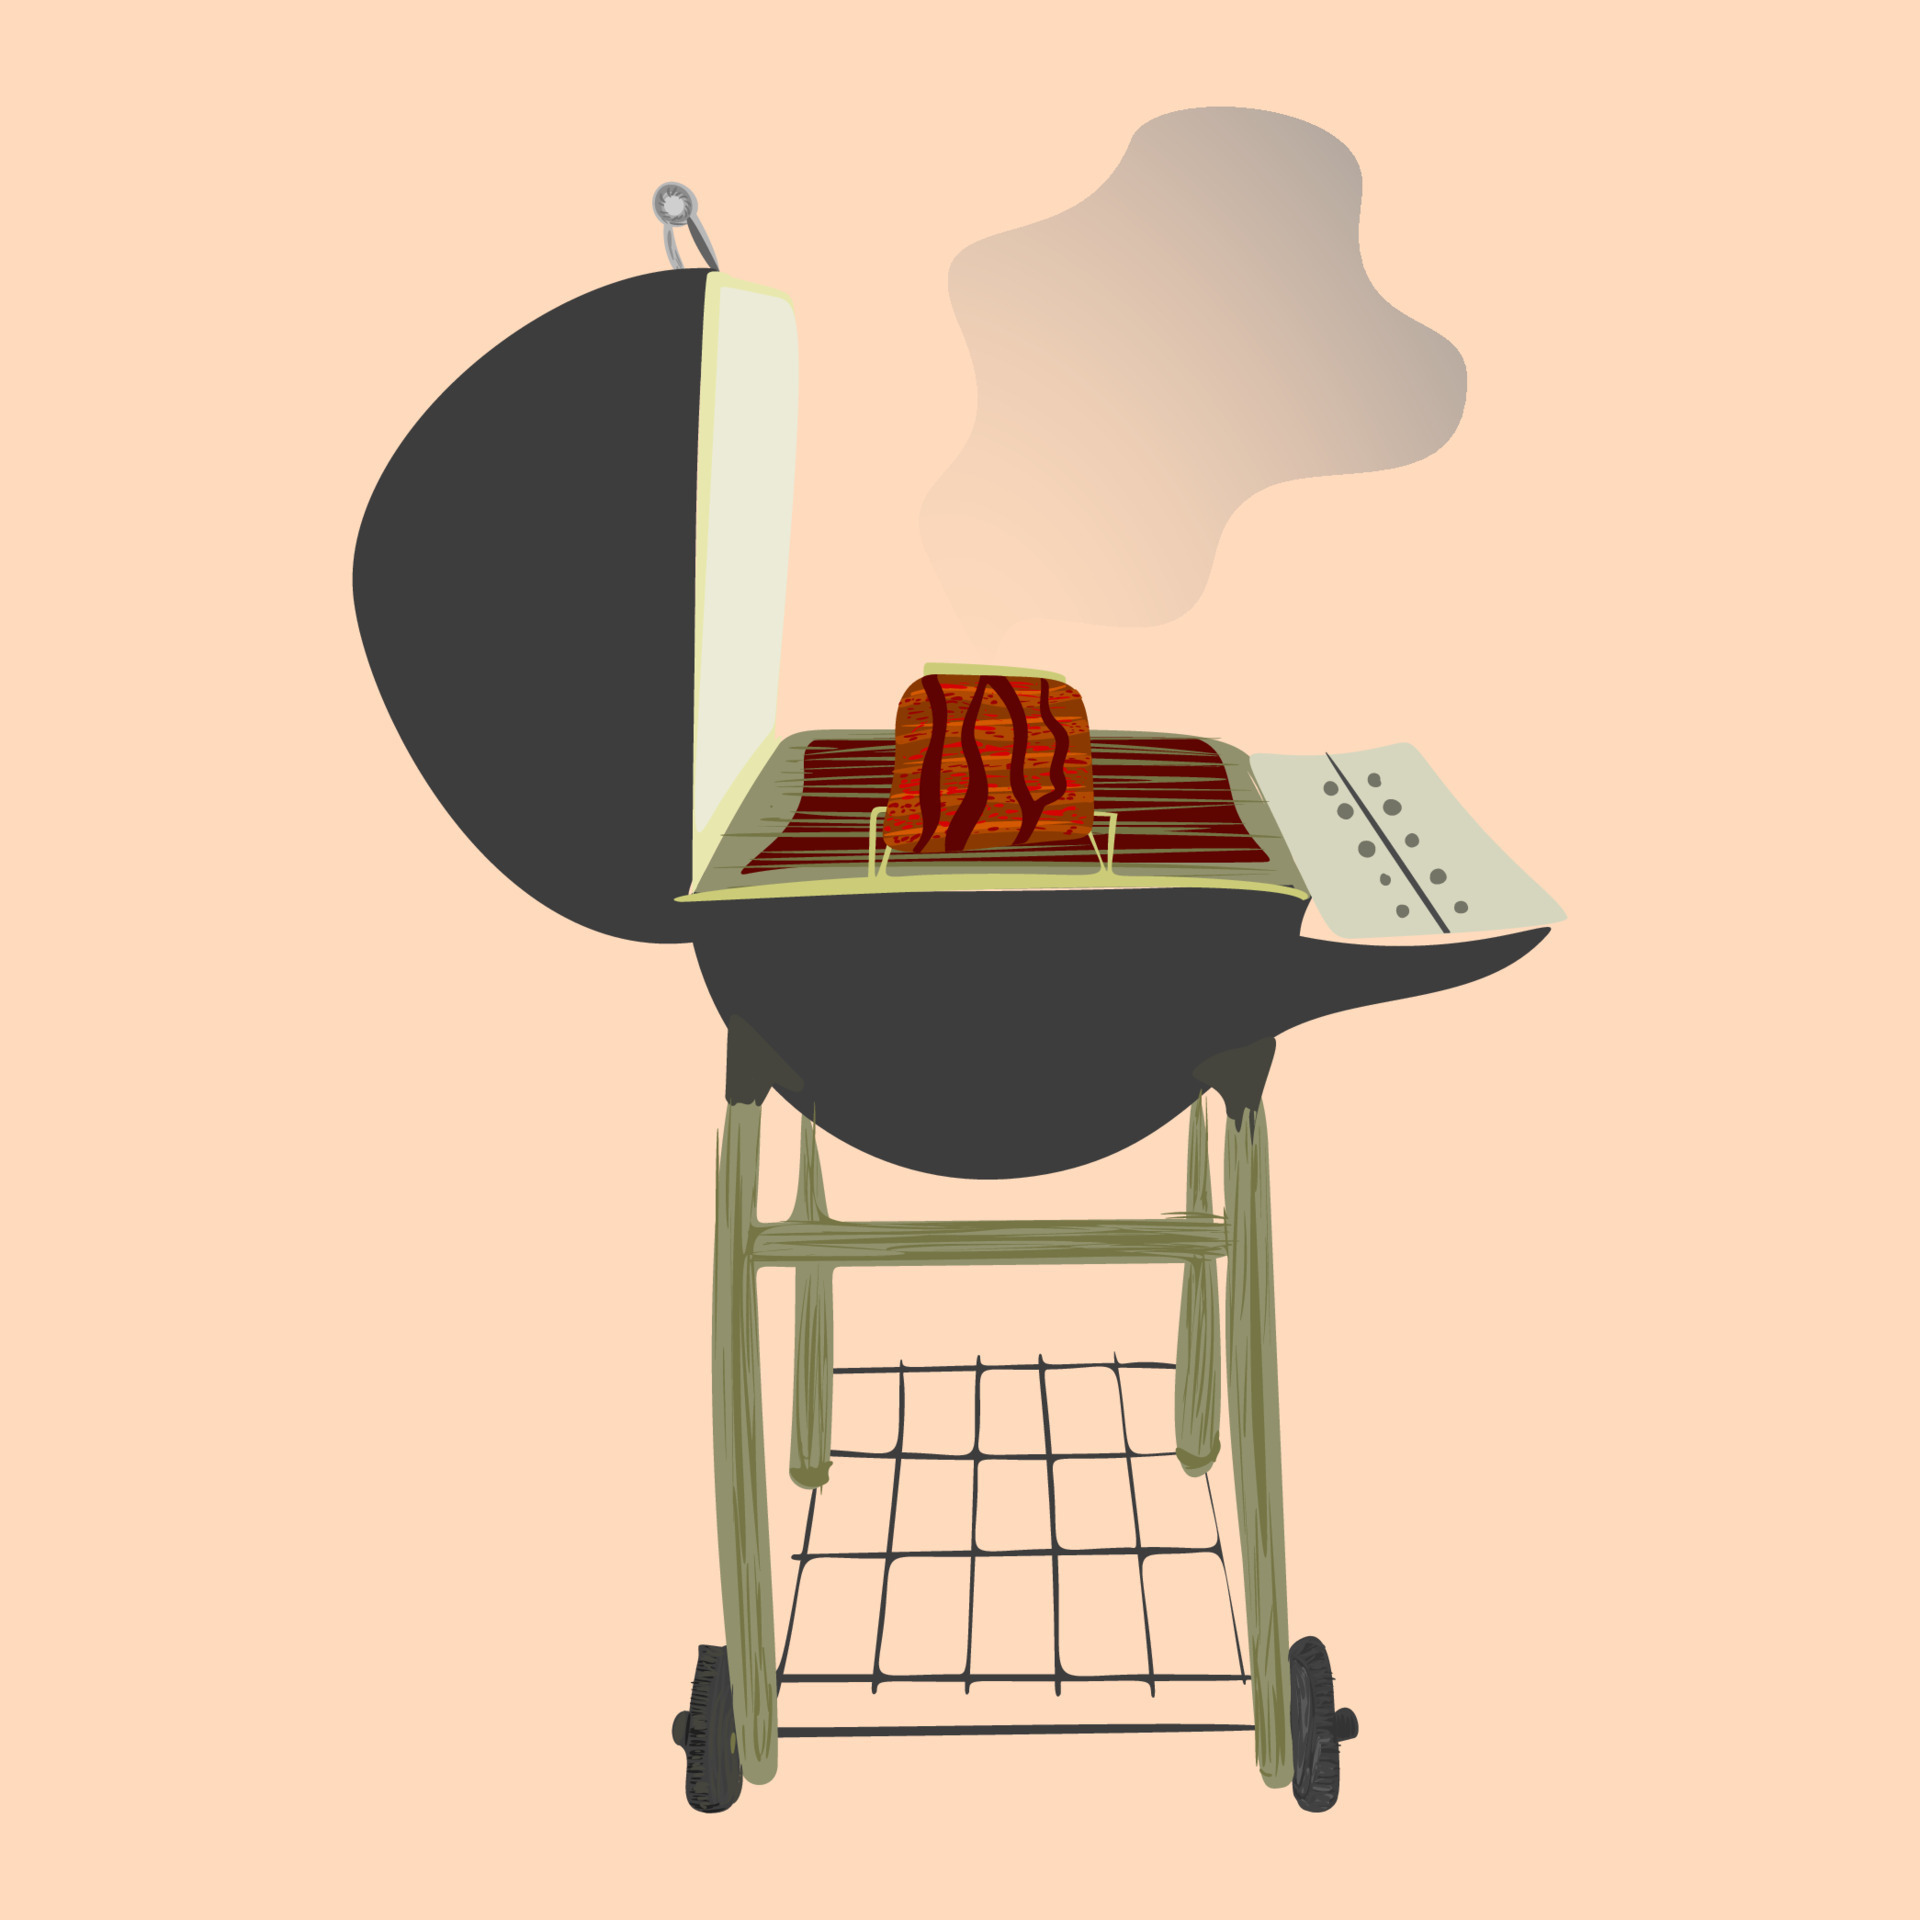 Black BBQ Grill with meat on white background. Food party icon